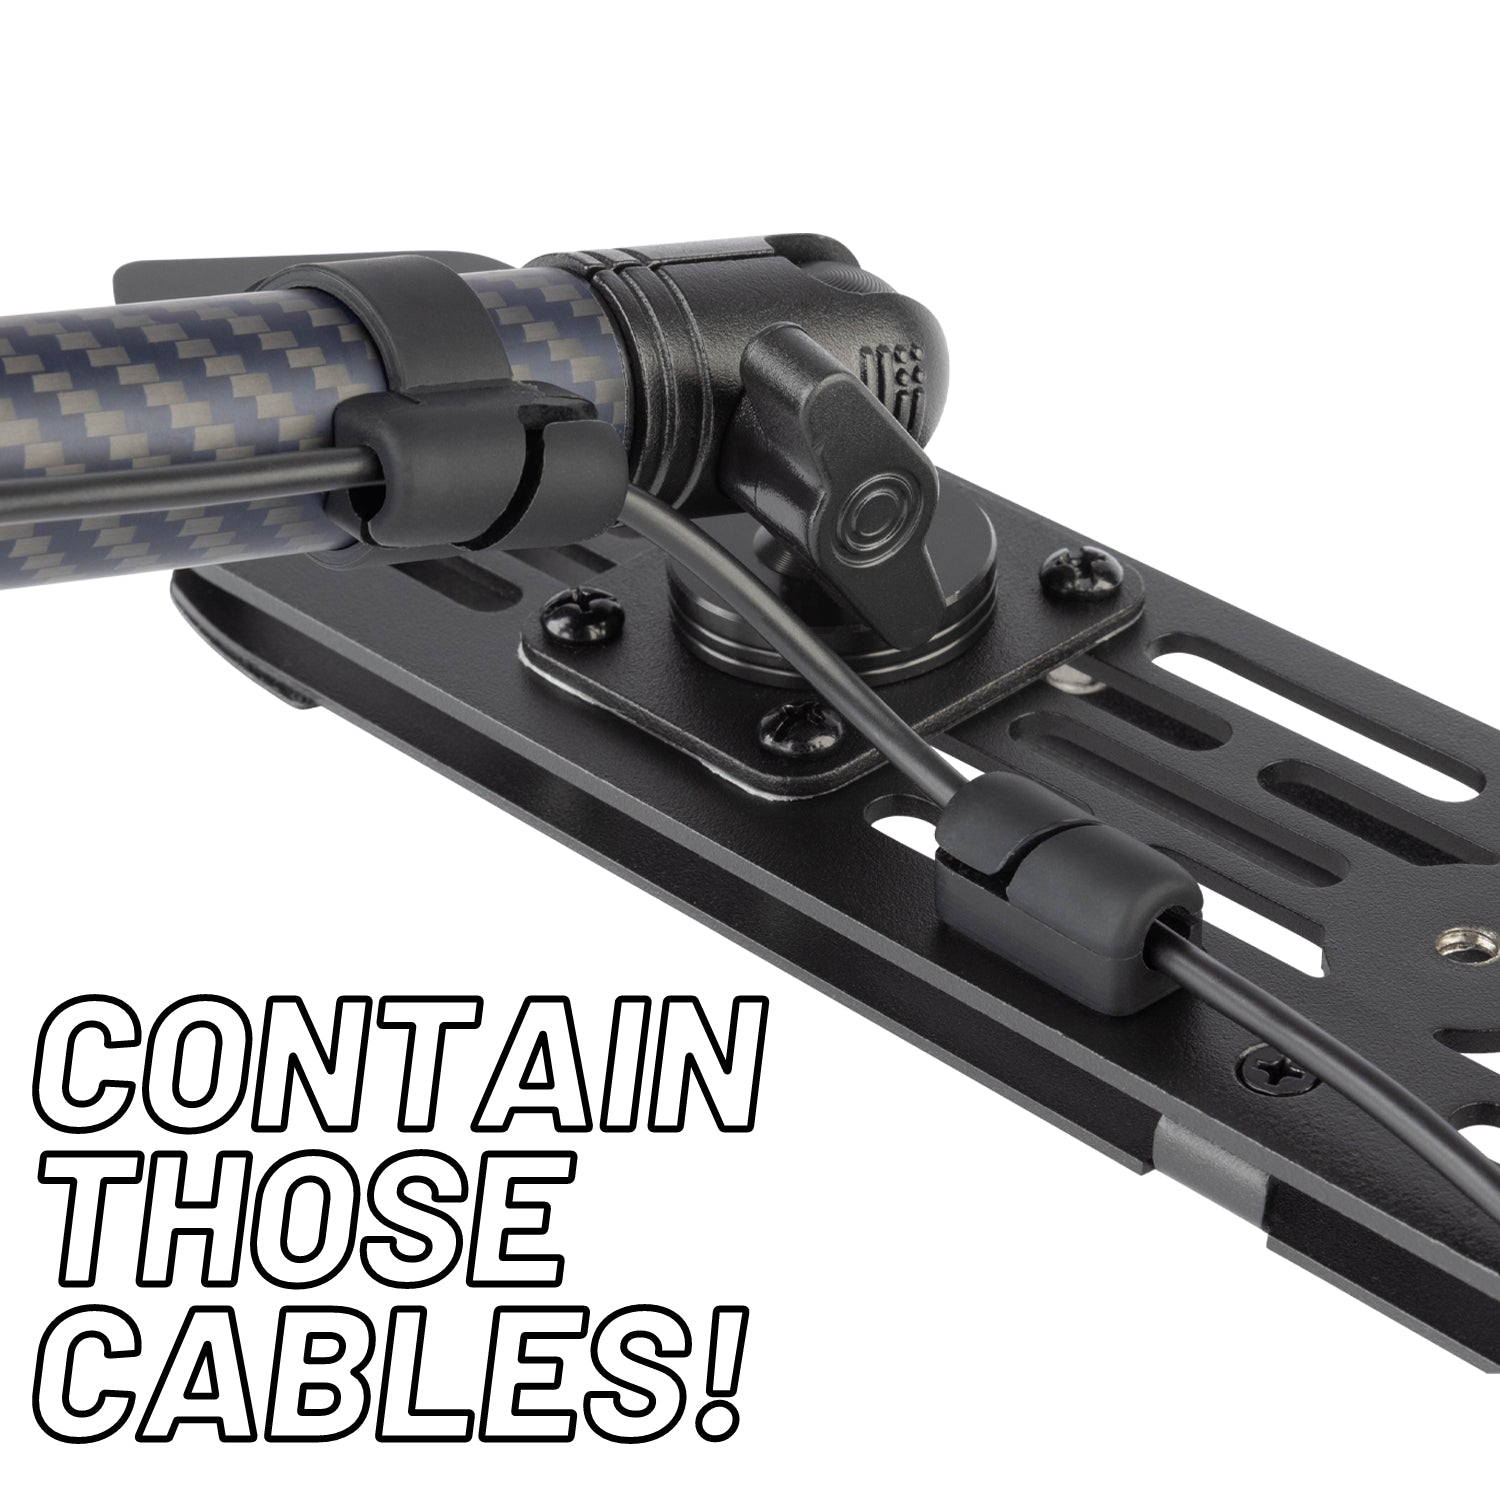 Cable Management Kit - Bulletpoint Mounting Solutions